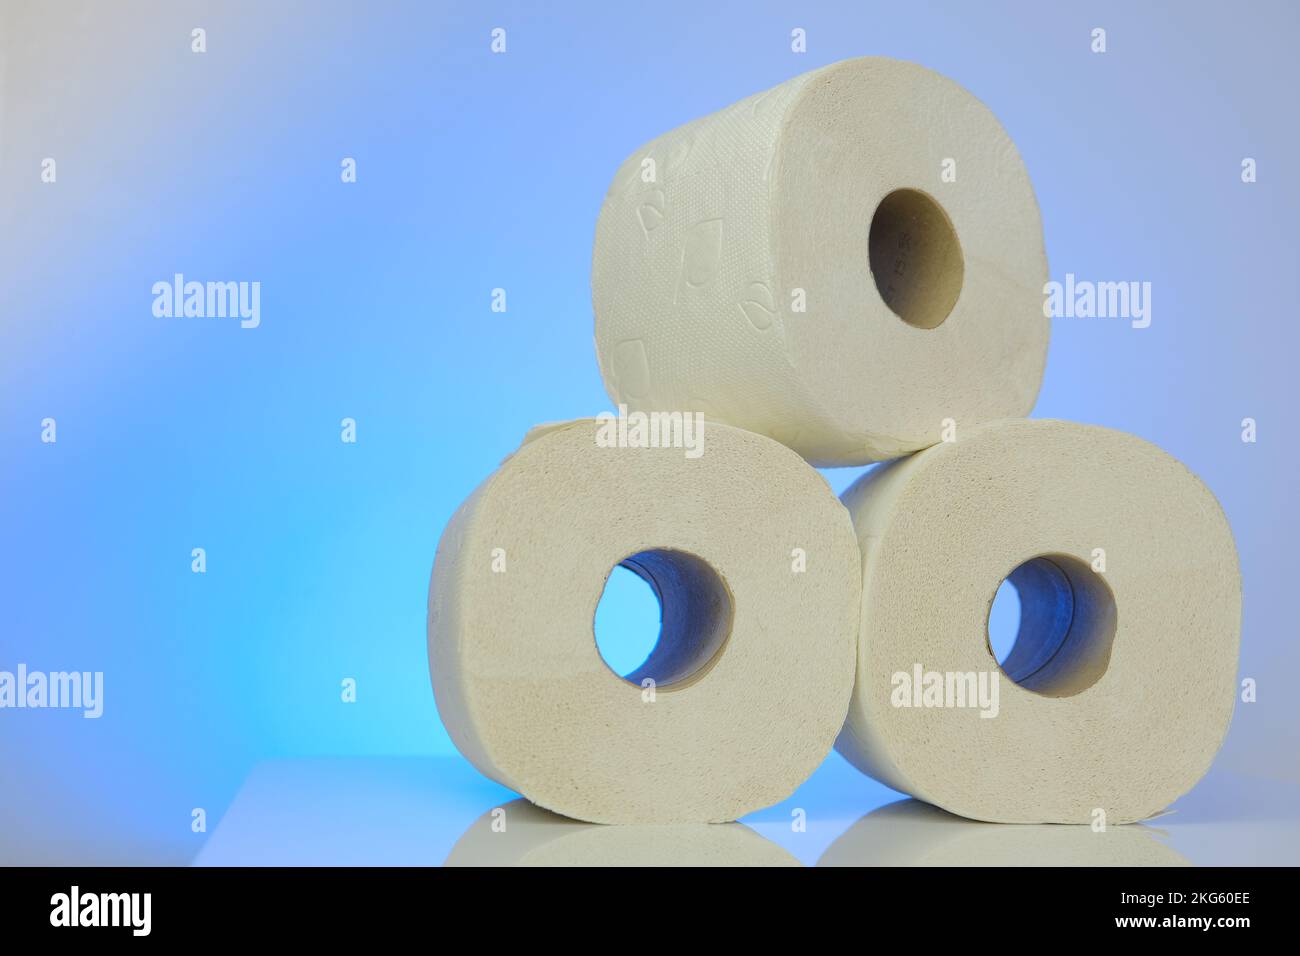 Toilet paper rolls set on a blue background.Purchase and shortage of toilet paper.Cleanliness and health. crisis of the paper industry in Europe. Stock Photo